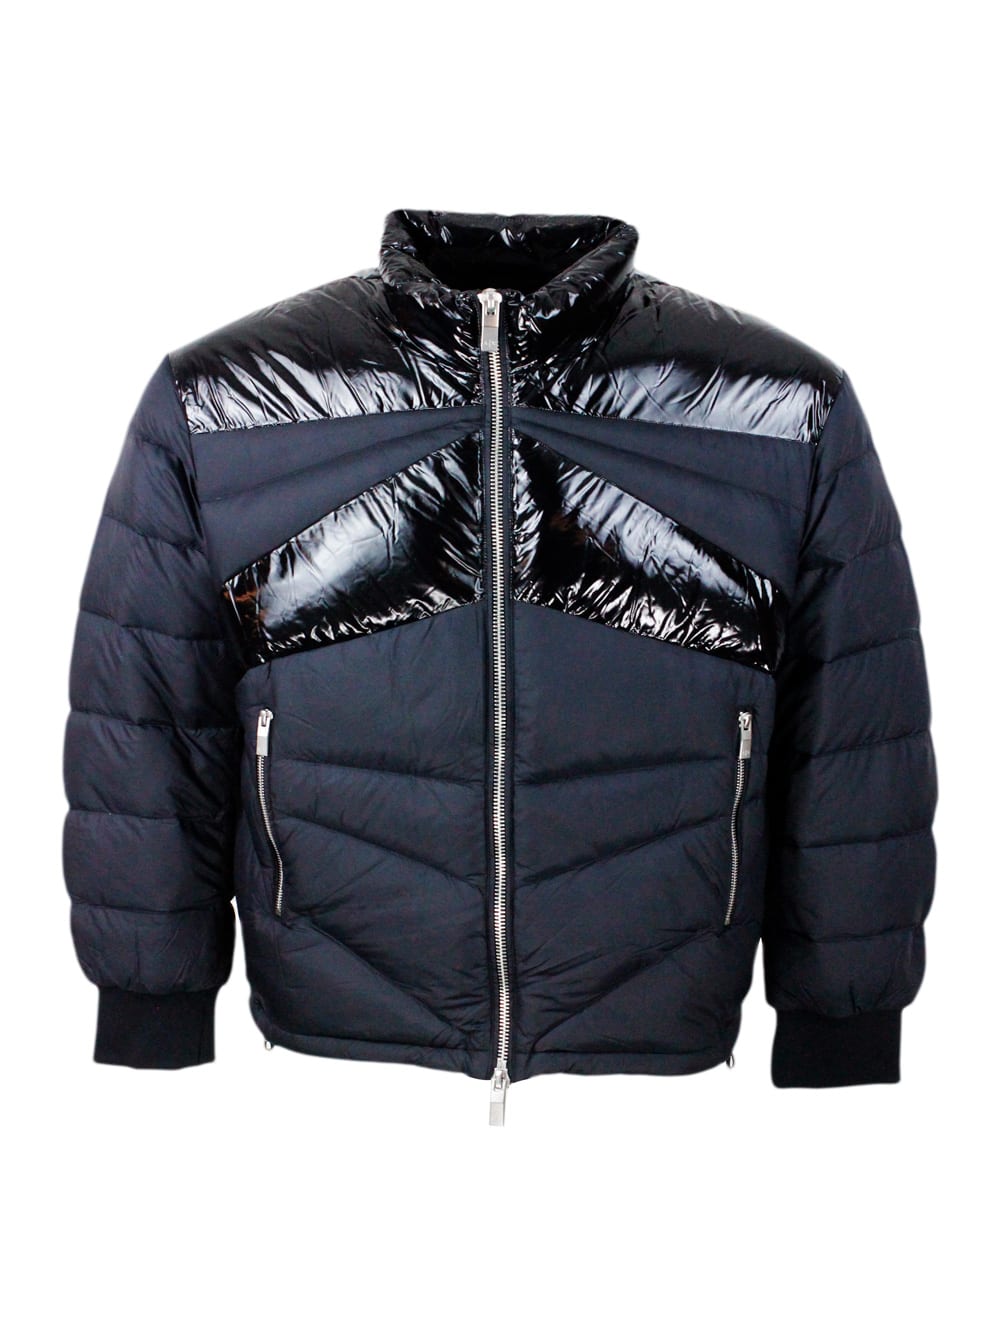 Real Goose Down Jacket With Drawstring At The Bottom And Logo On The Back Neck Embellished With A Matching Lacquered Motif On The Front And Back.